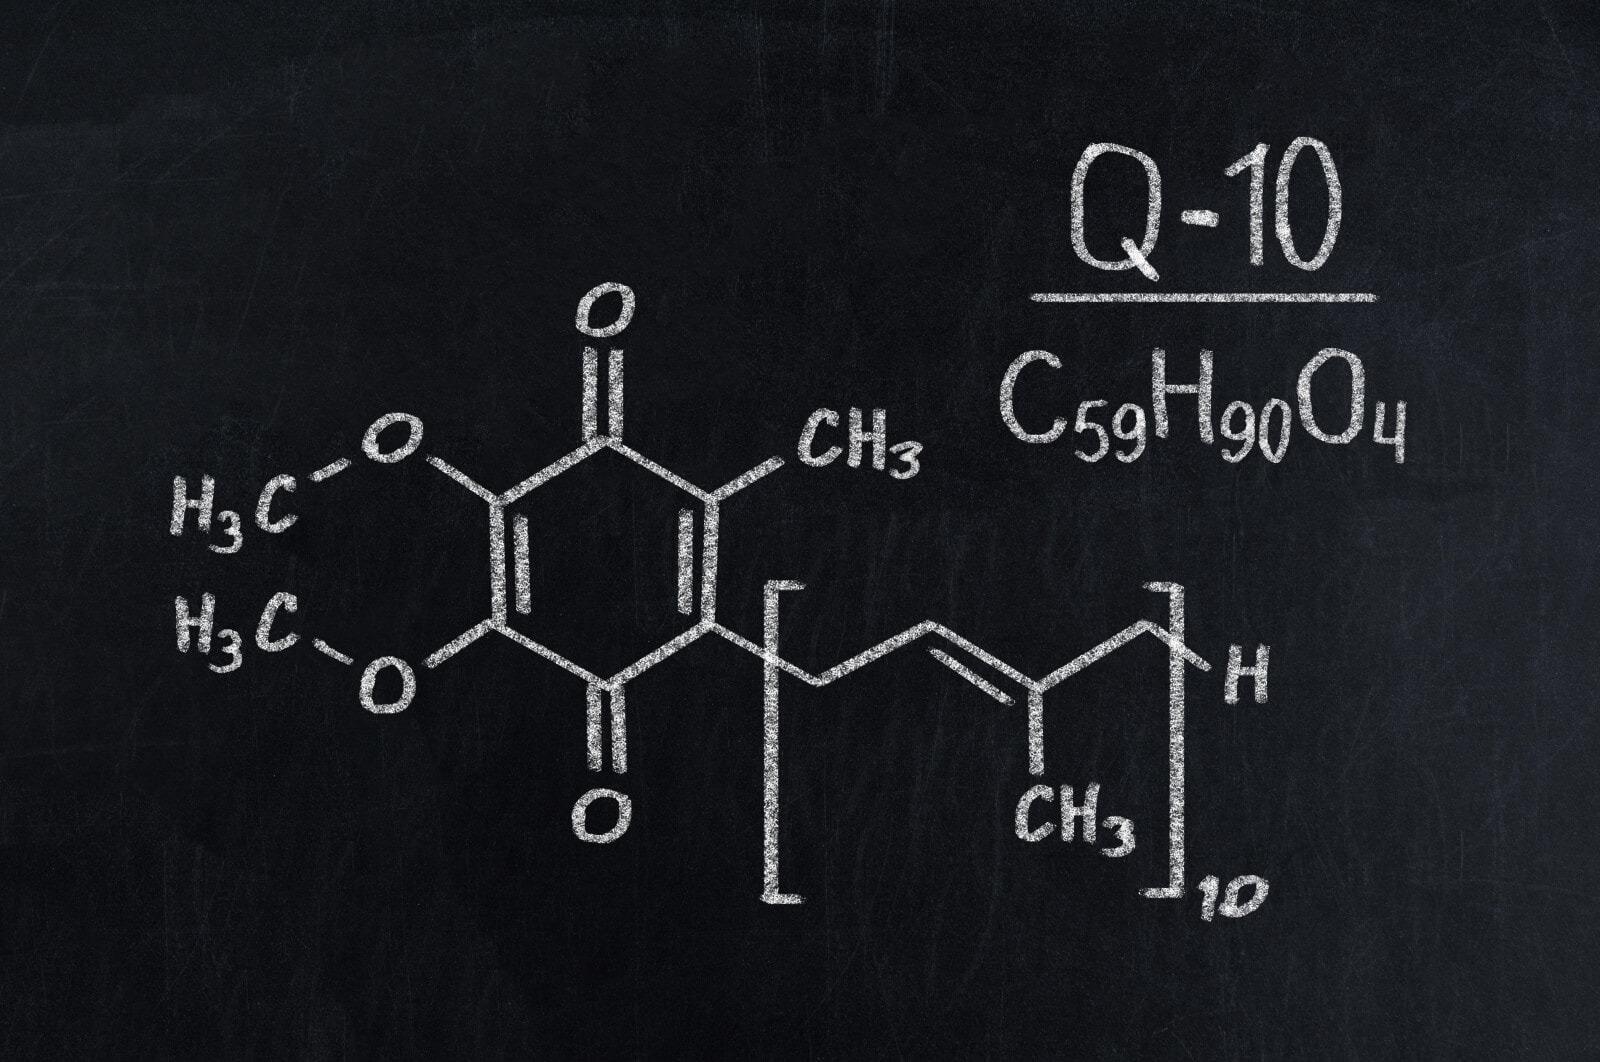 Coenzyme Q10 – a compound that occurs naturally in the body